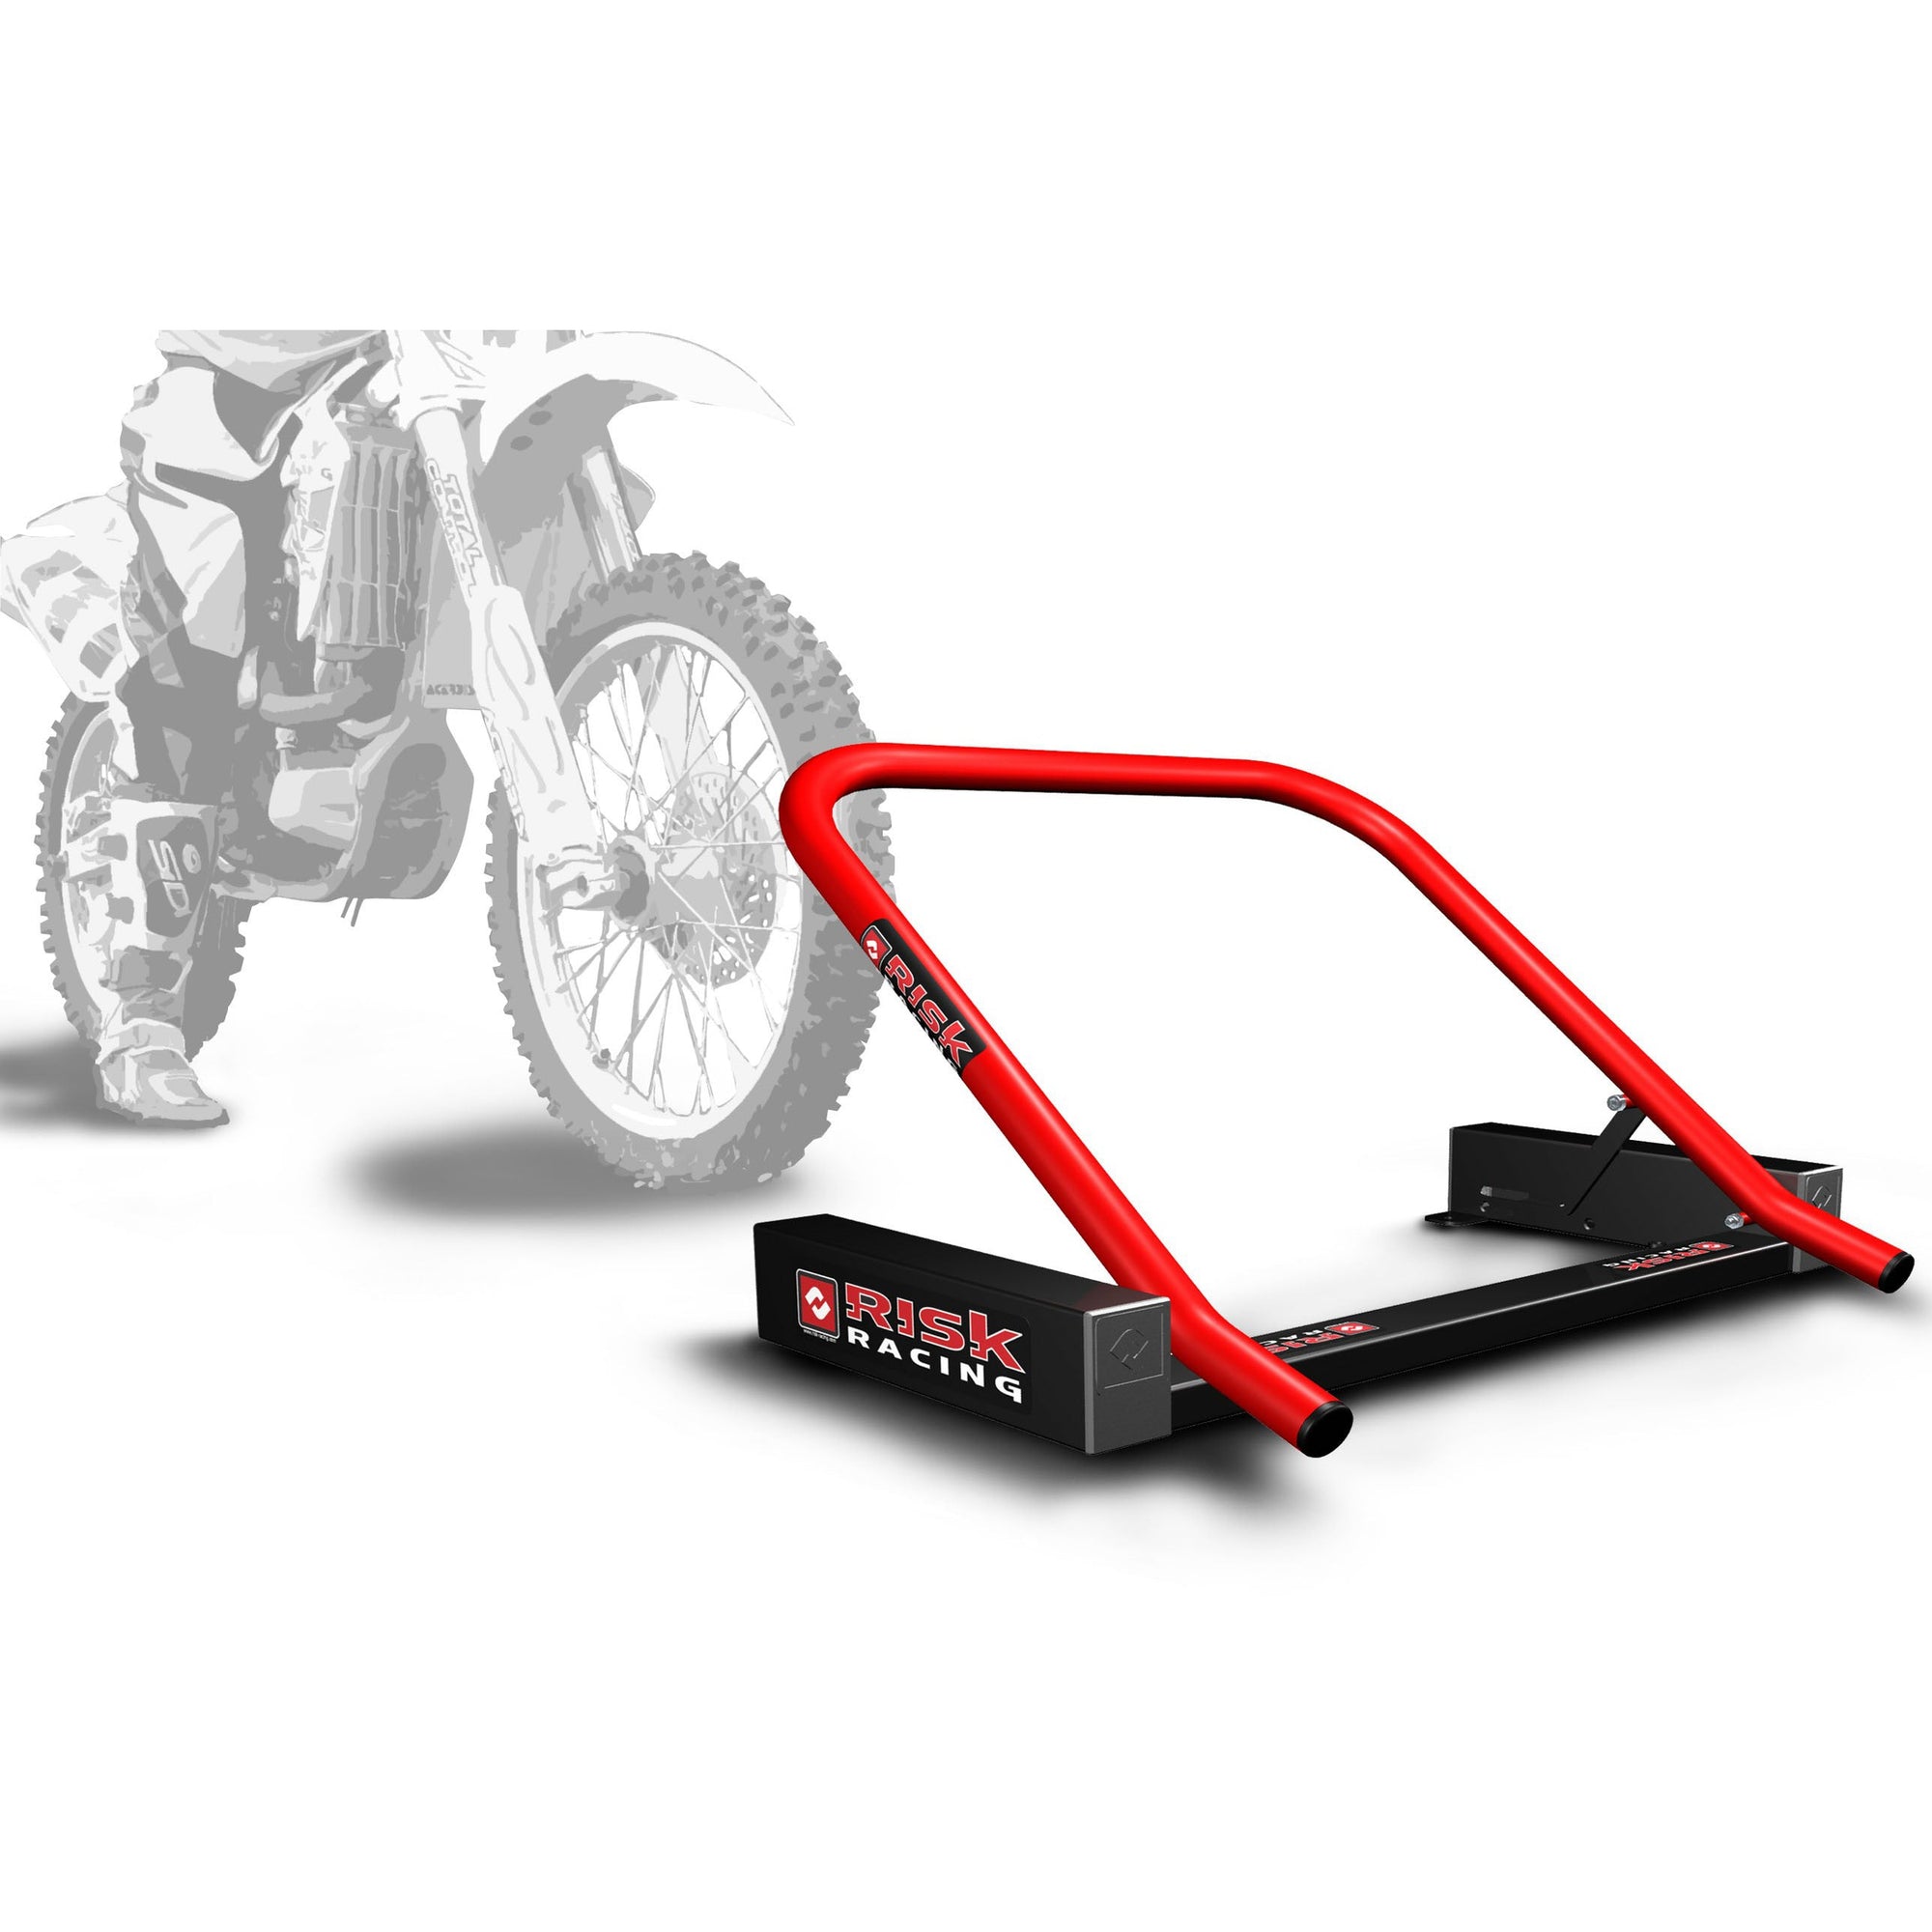 Holeshot Race Gate by Risk Racing